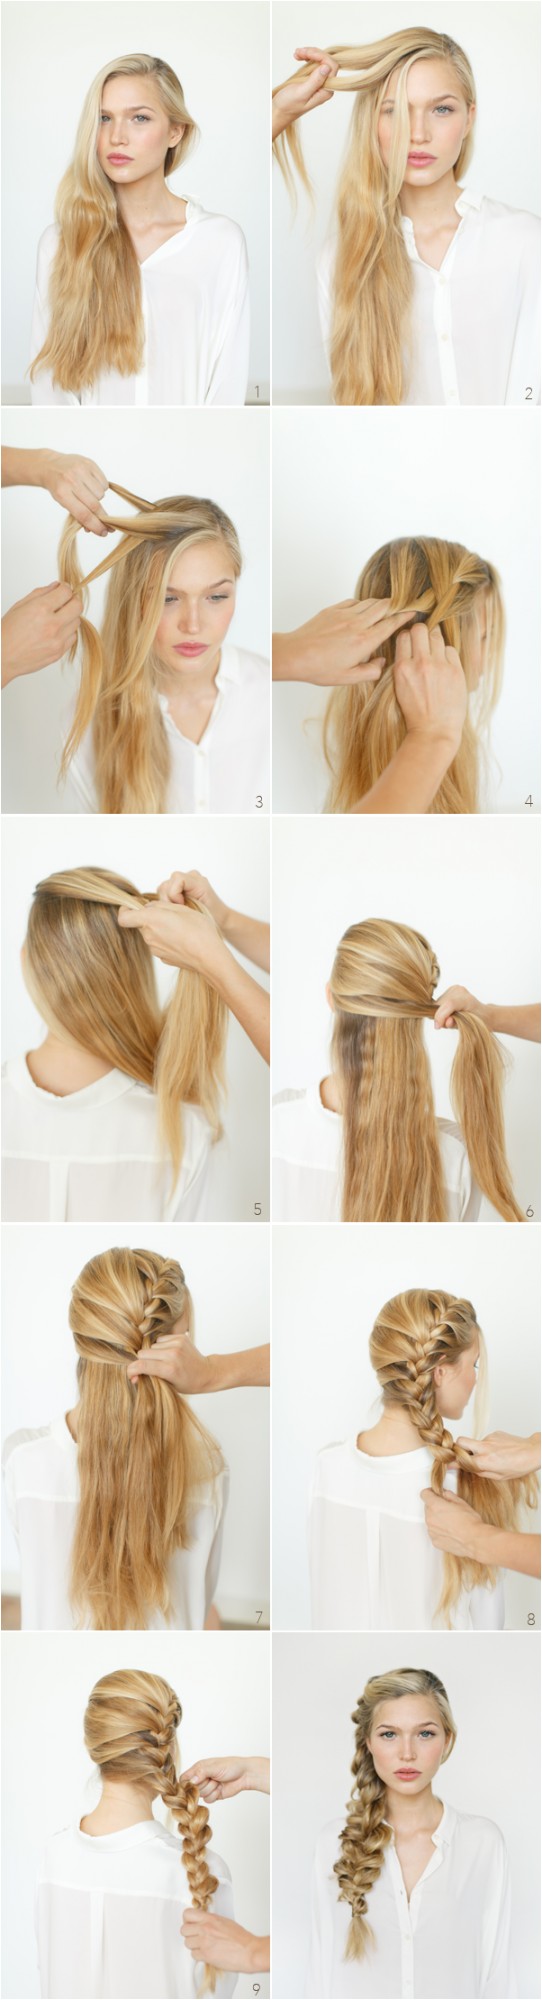 18 easy step by step tutorials for perfect hairstyles